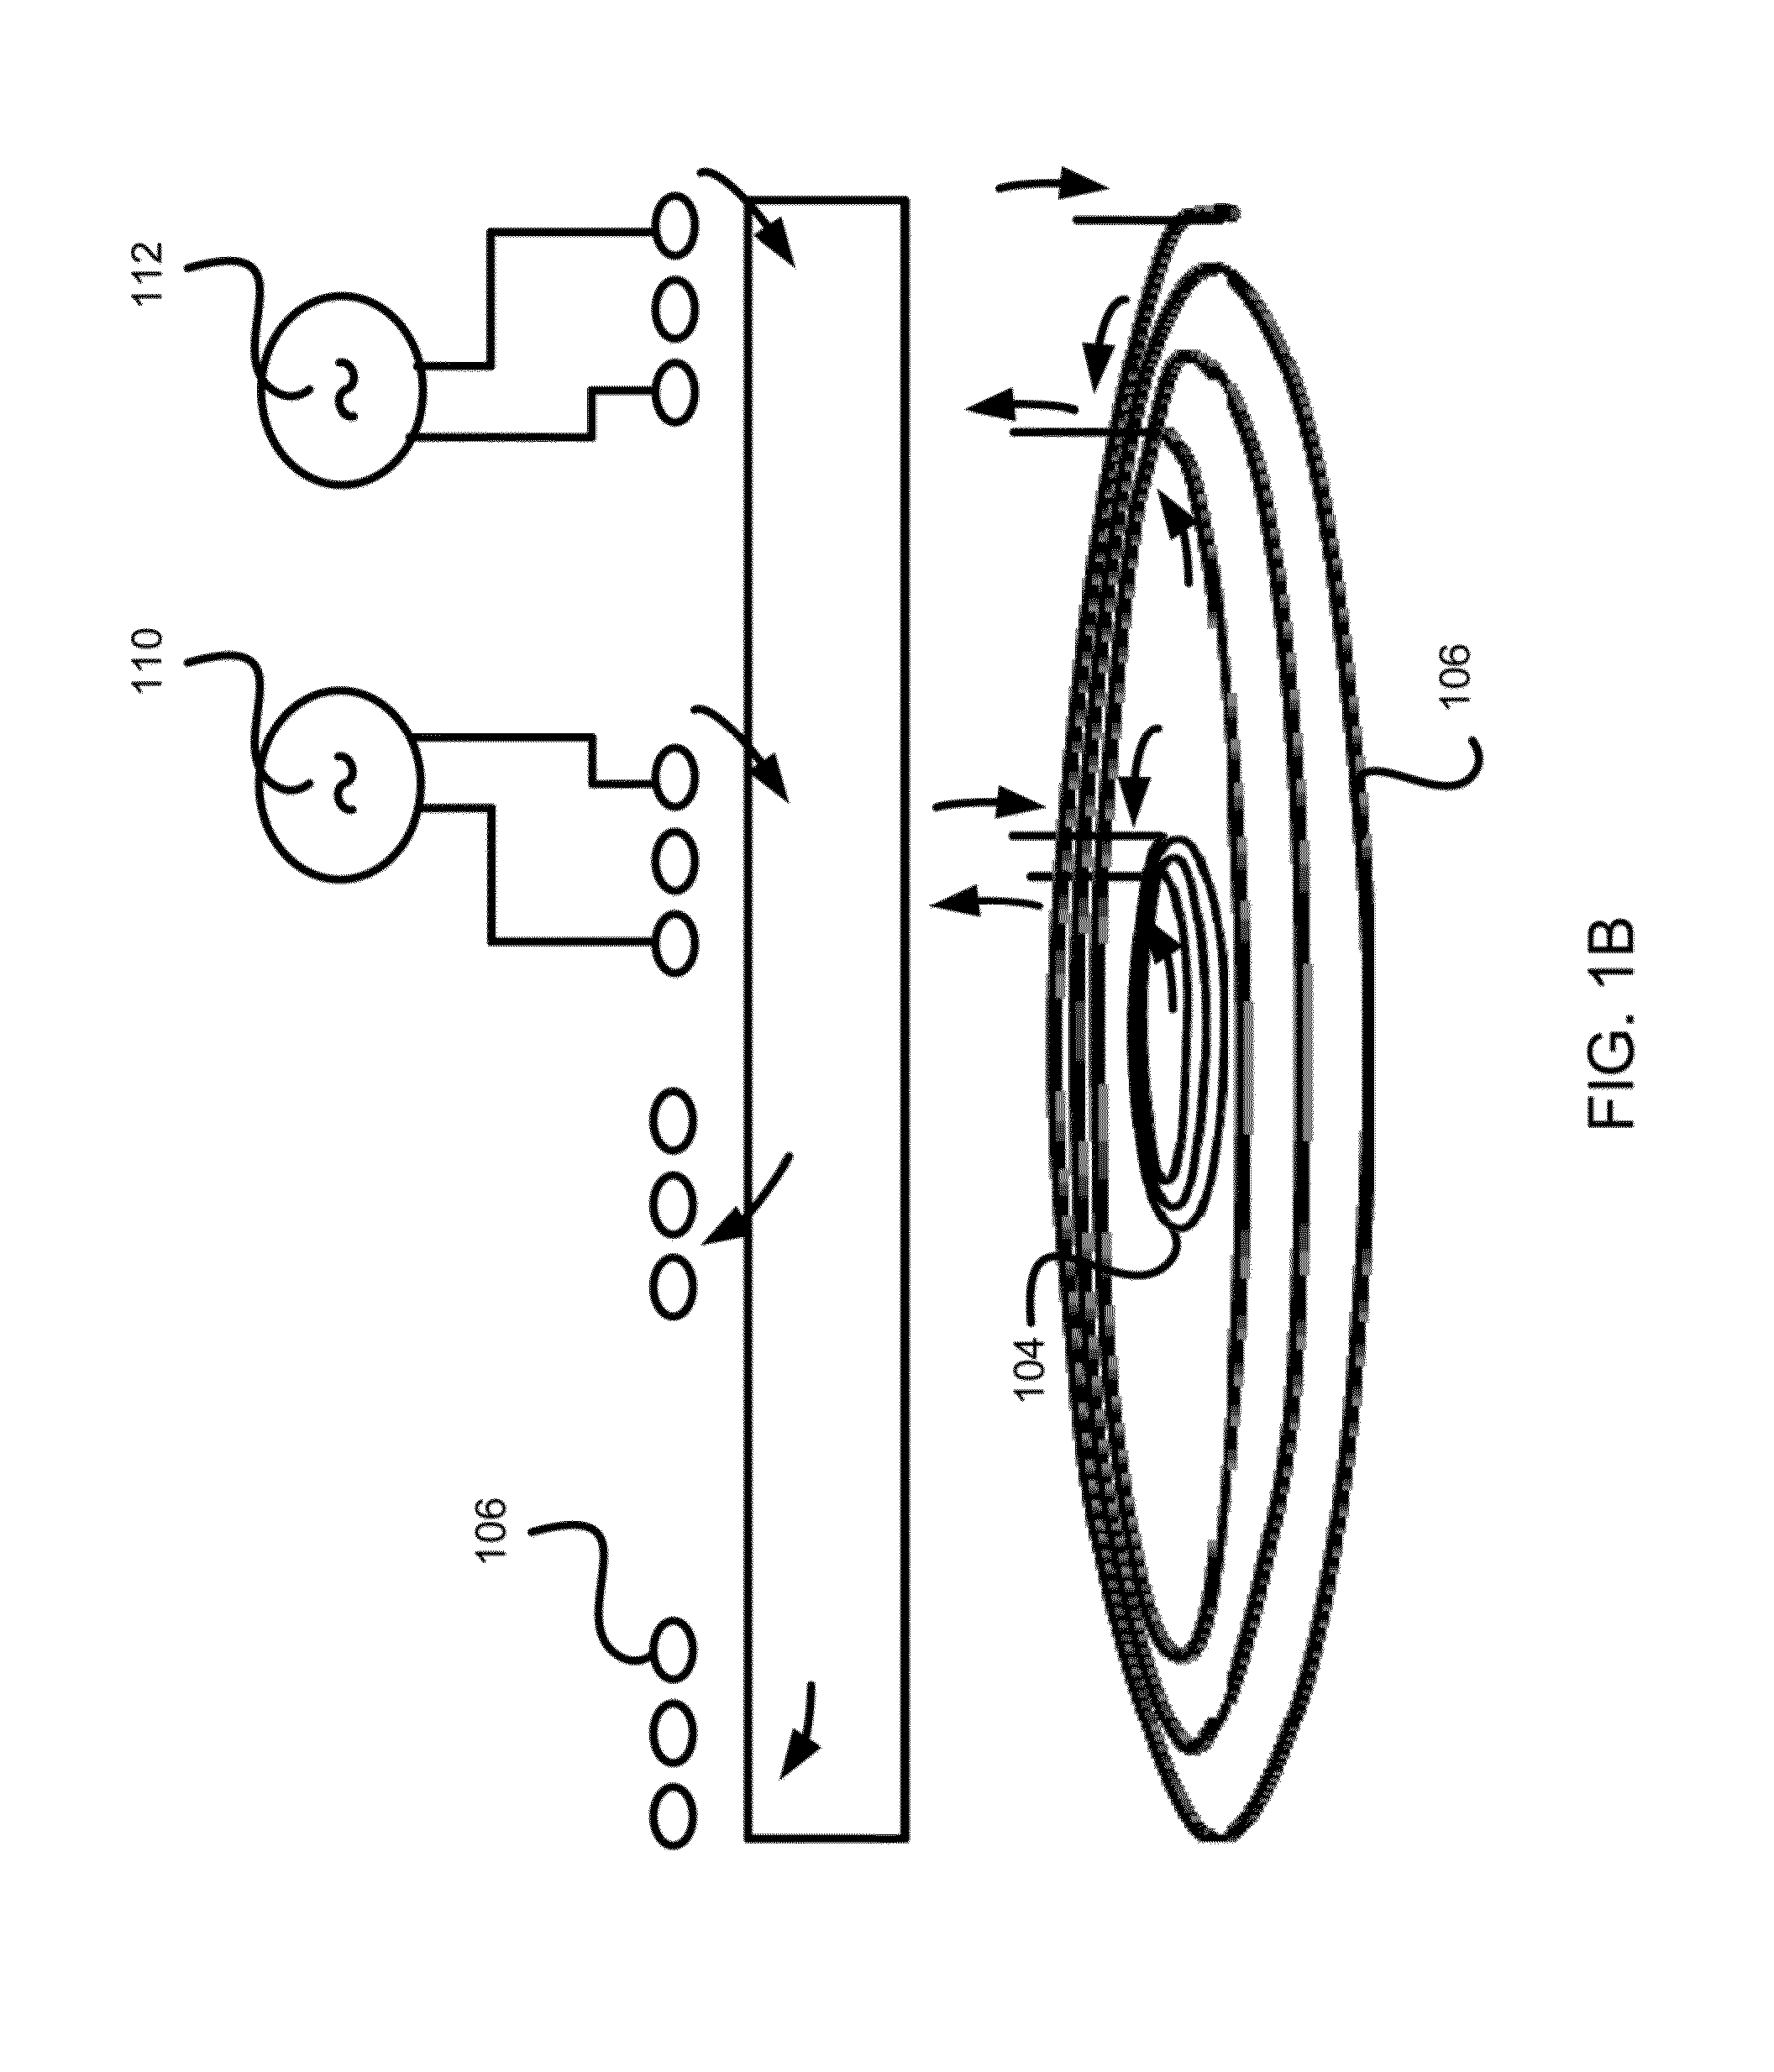 Methods and apparatuses for controlling plasma in a plasma processing chamber